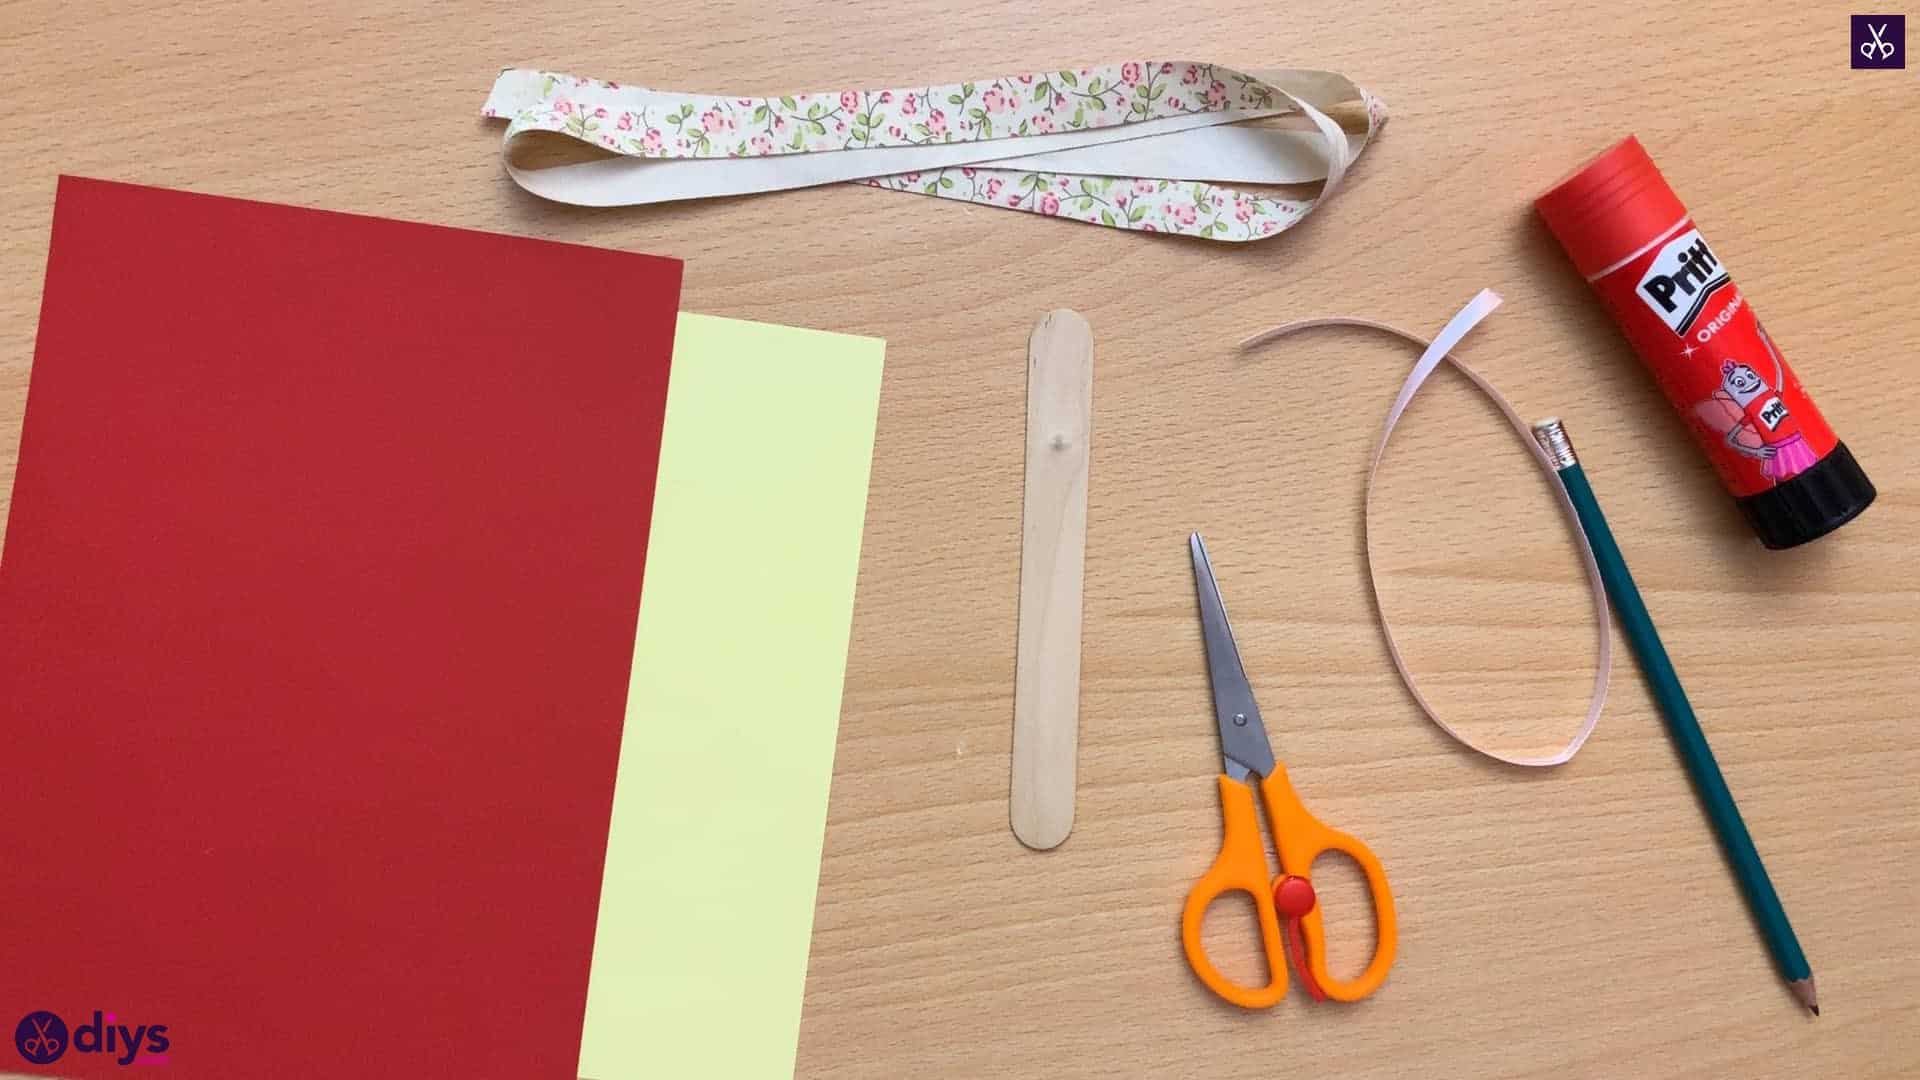 Popsicle stick flower bookmark materials